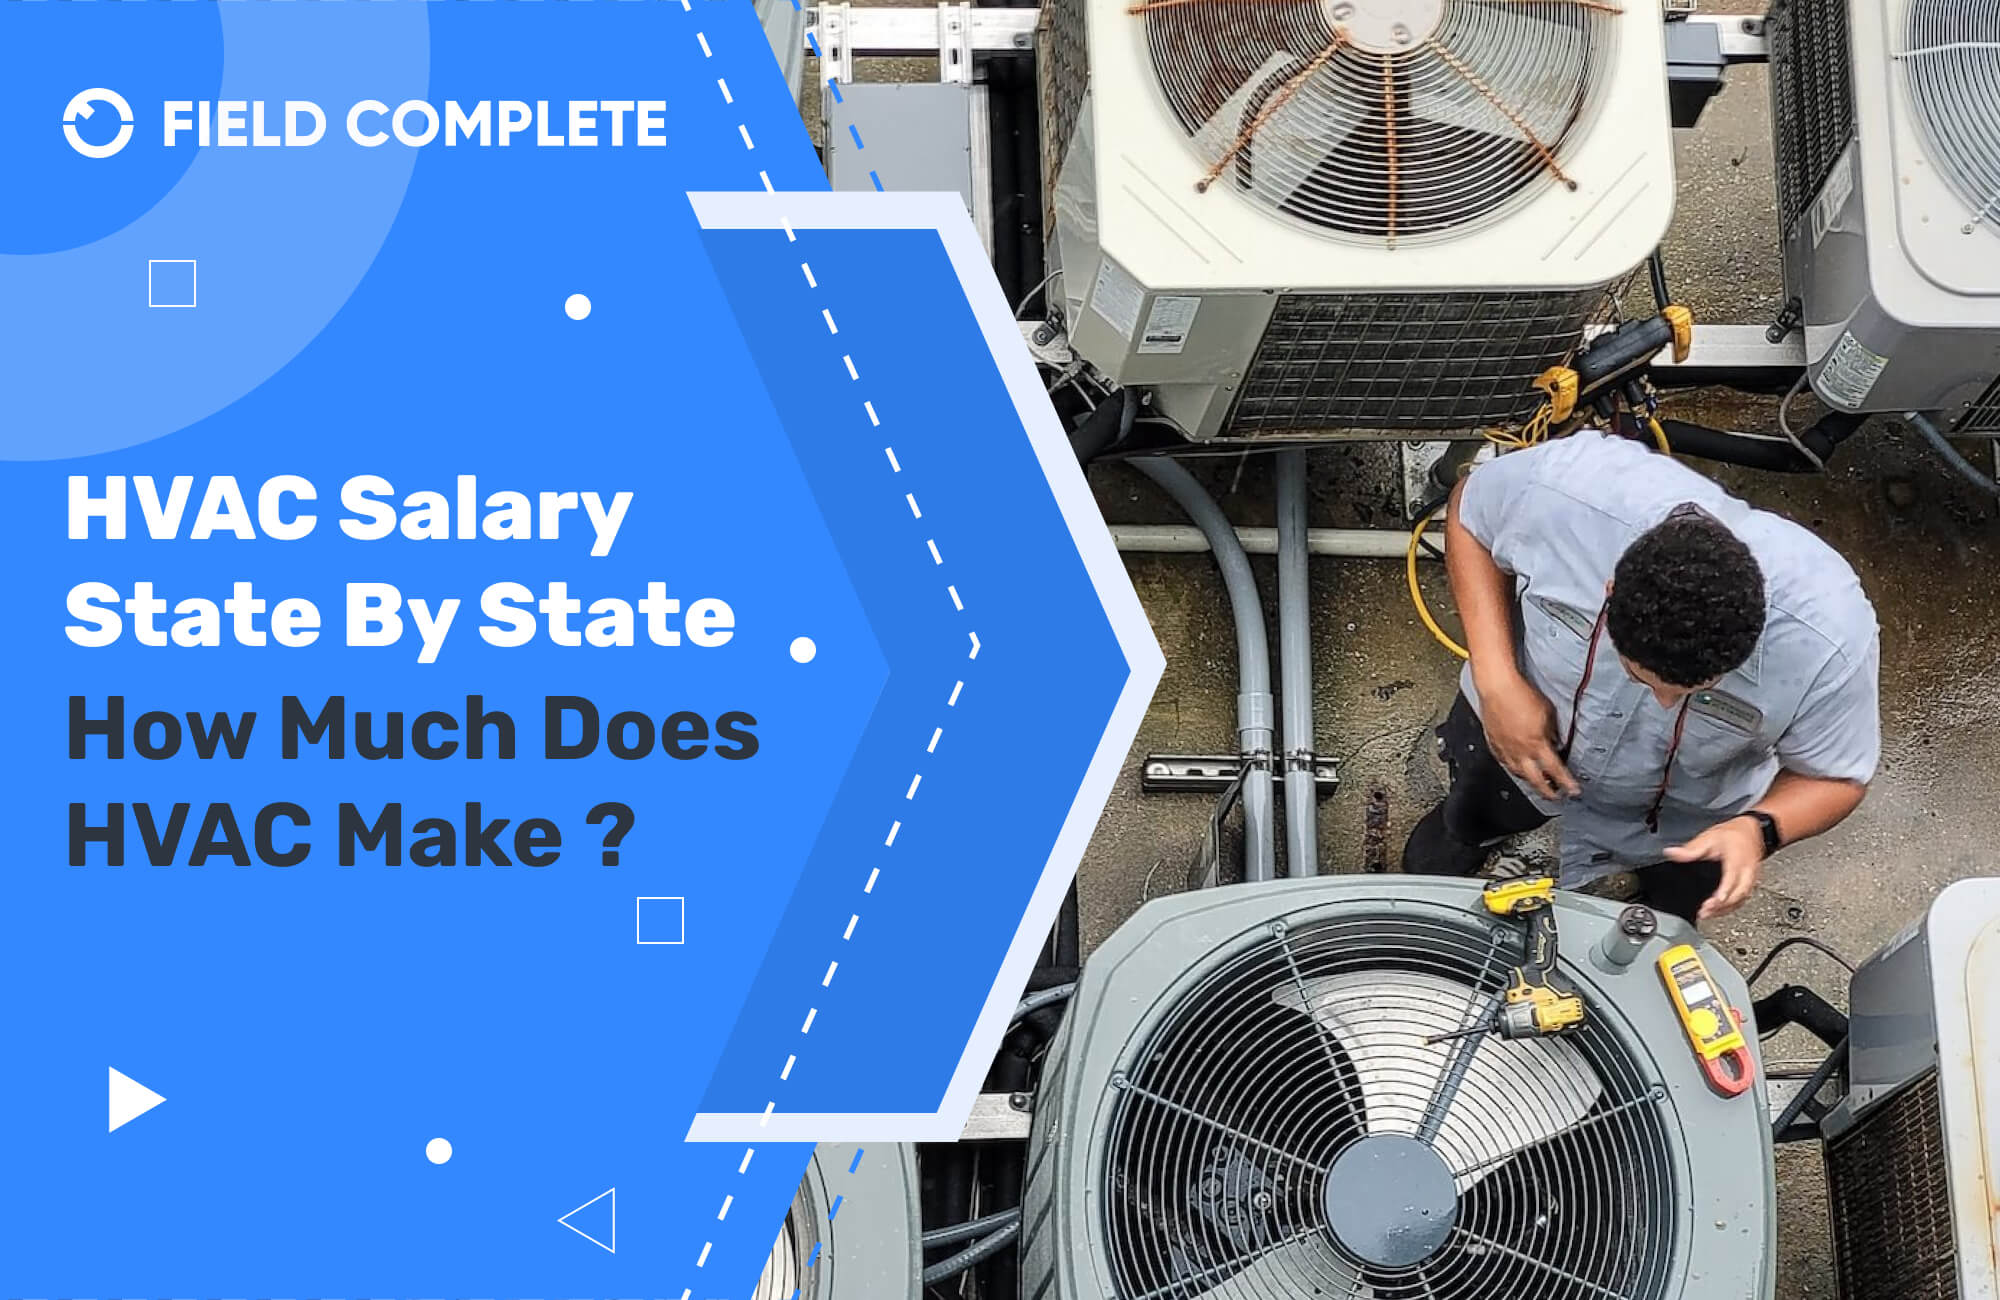 HVAC Salary State By State. How Much Does HVAC Make?